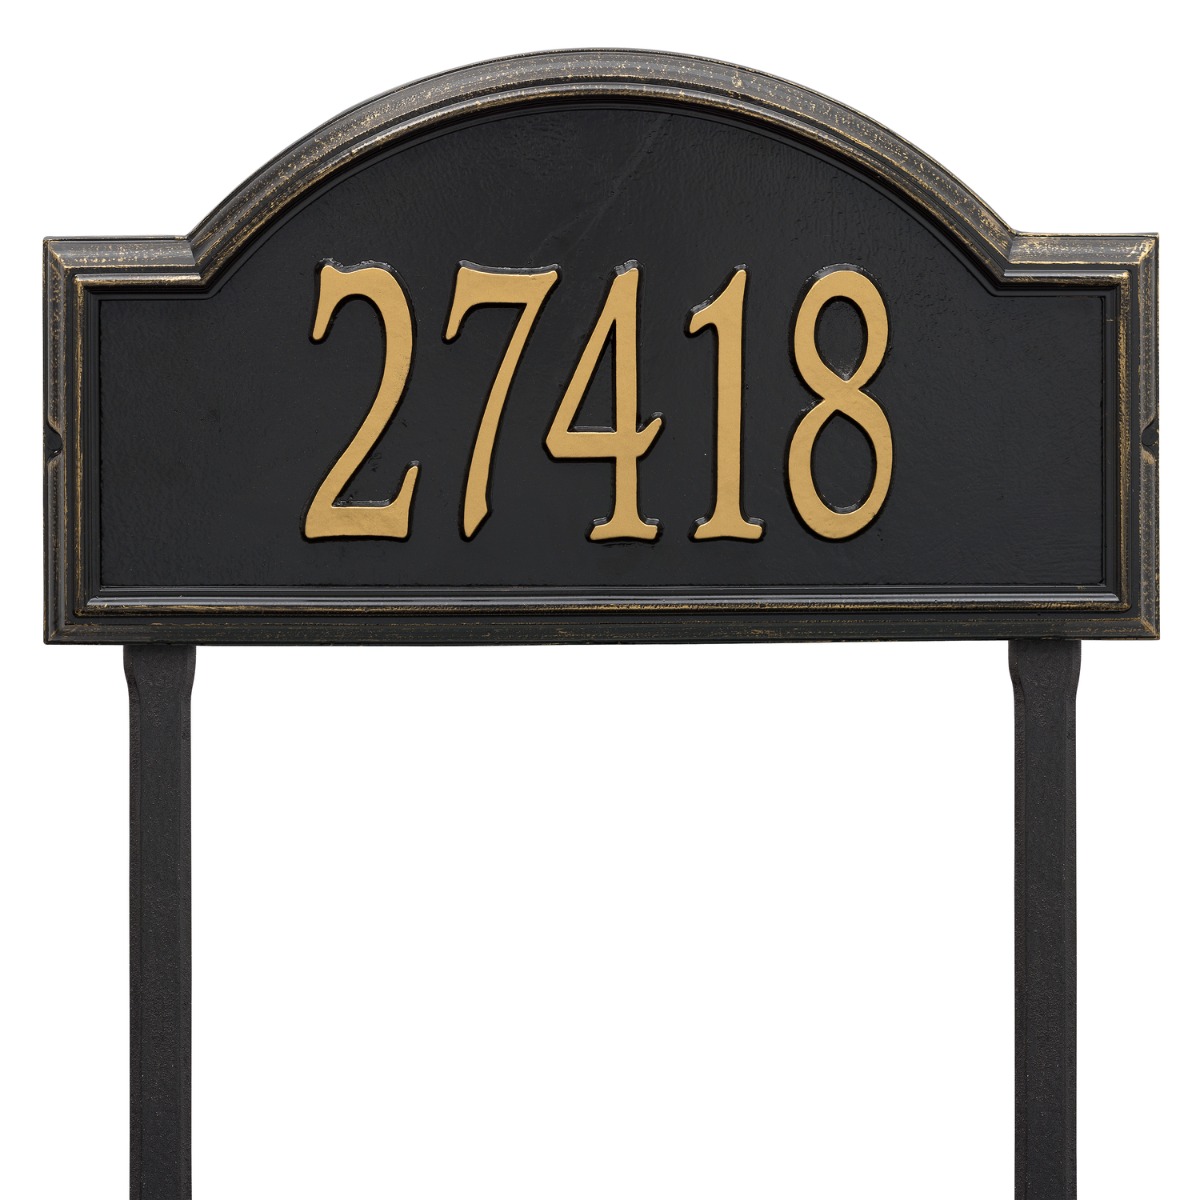 Whitehall Providence Arch - Estate Lawn - One Line Address Plaque 